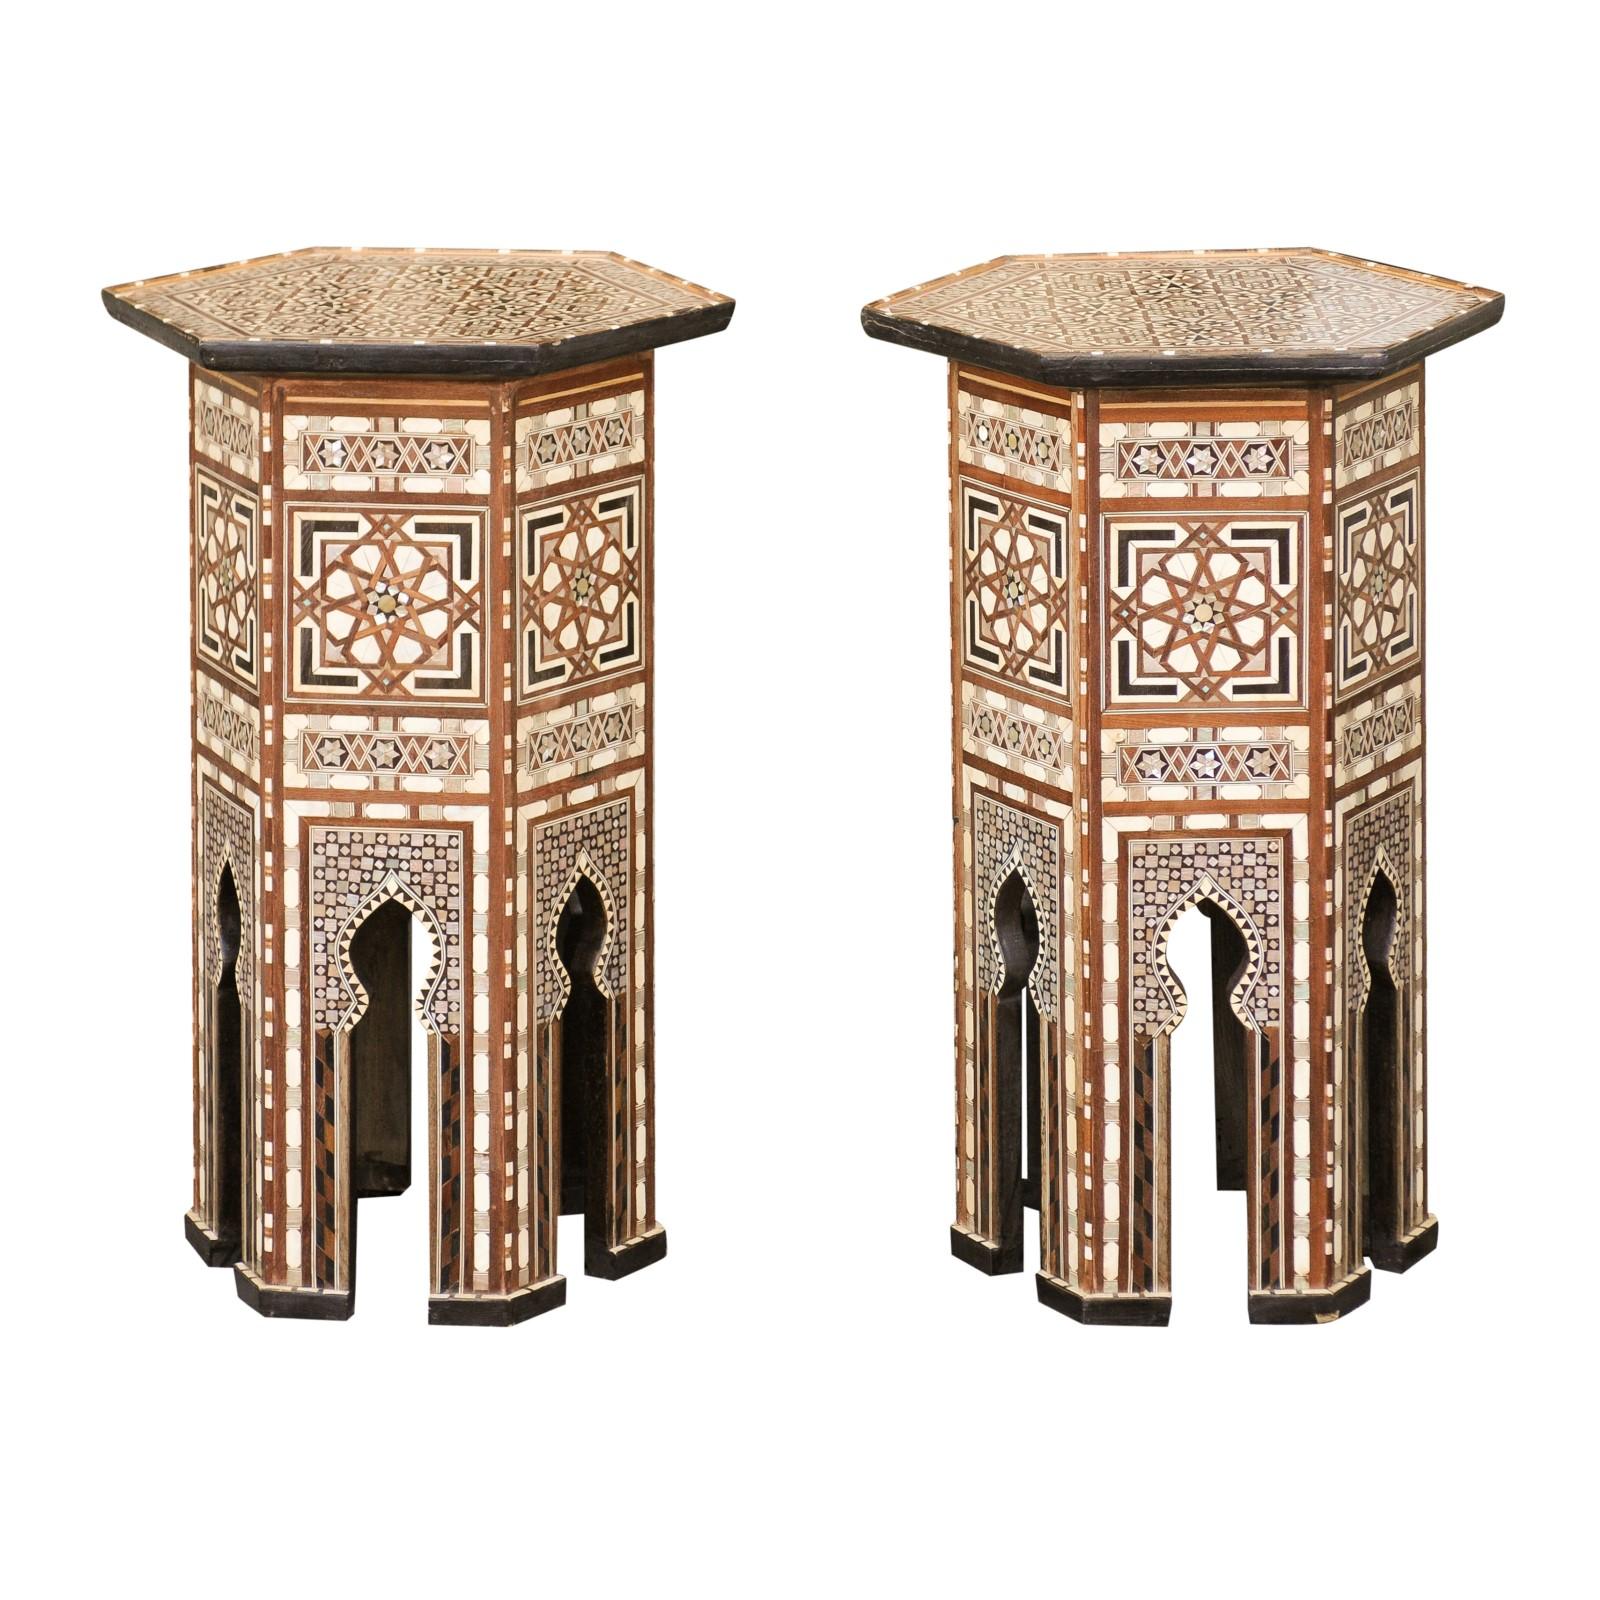 Pair of Syrian Moorish Style Side Tables with Inlaid Mother of Pearl and Bone